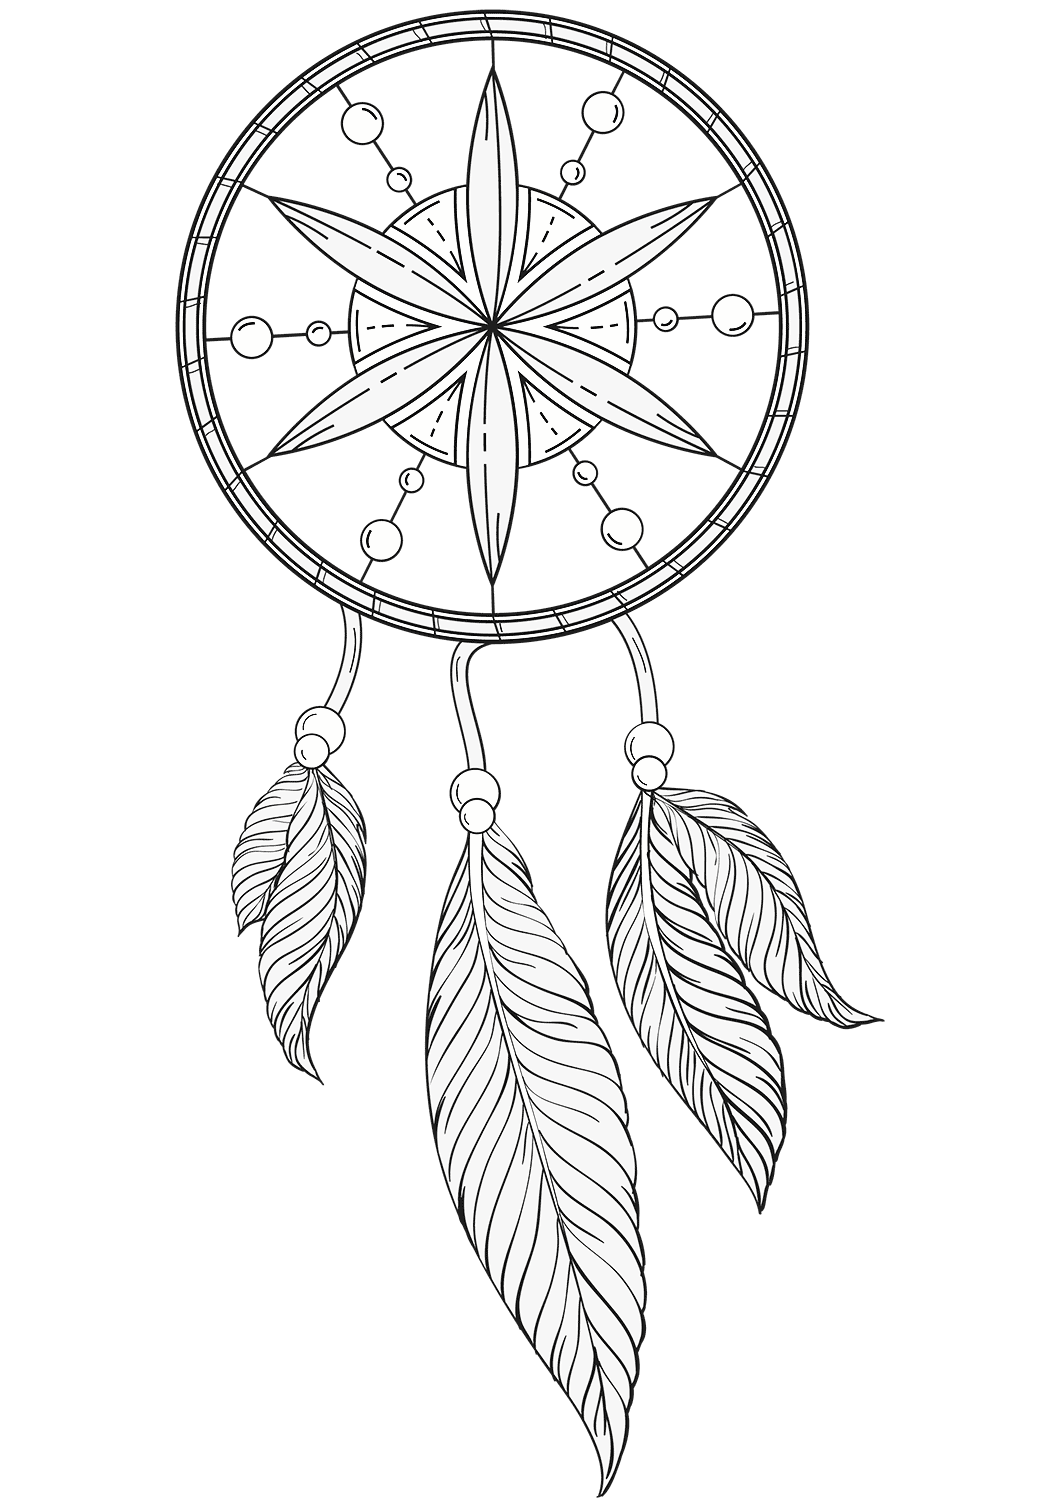 dream-catcher-coloring-page-free-printable-coloring-pages-for-kids